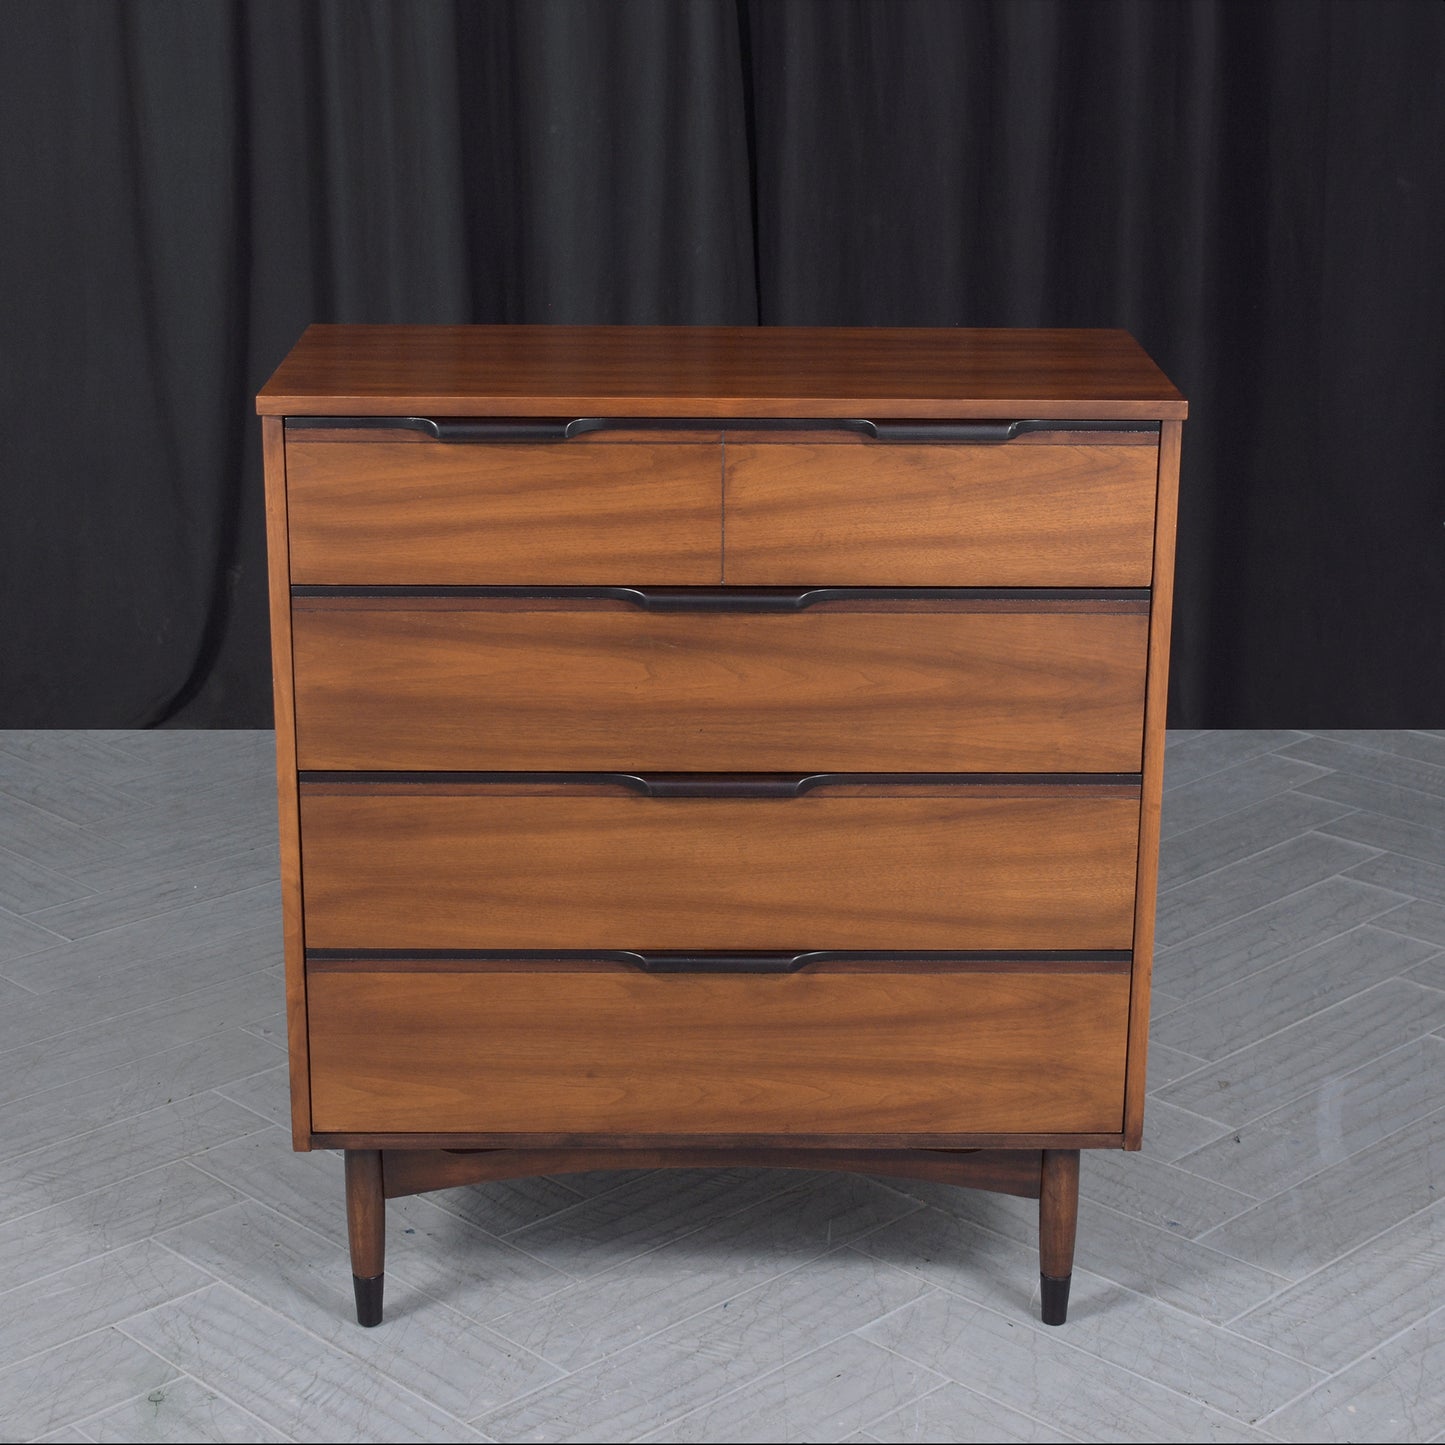 Handcrafted Modern Walnut Dresser: Two-Tone with High-Gloss Finish